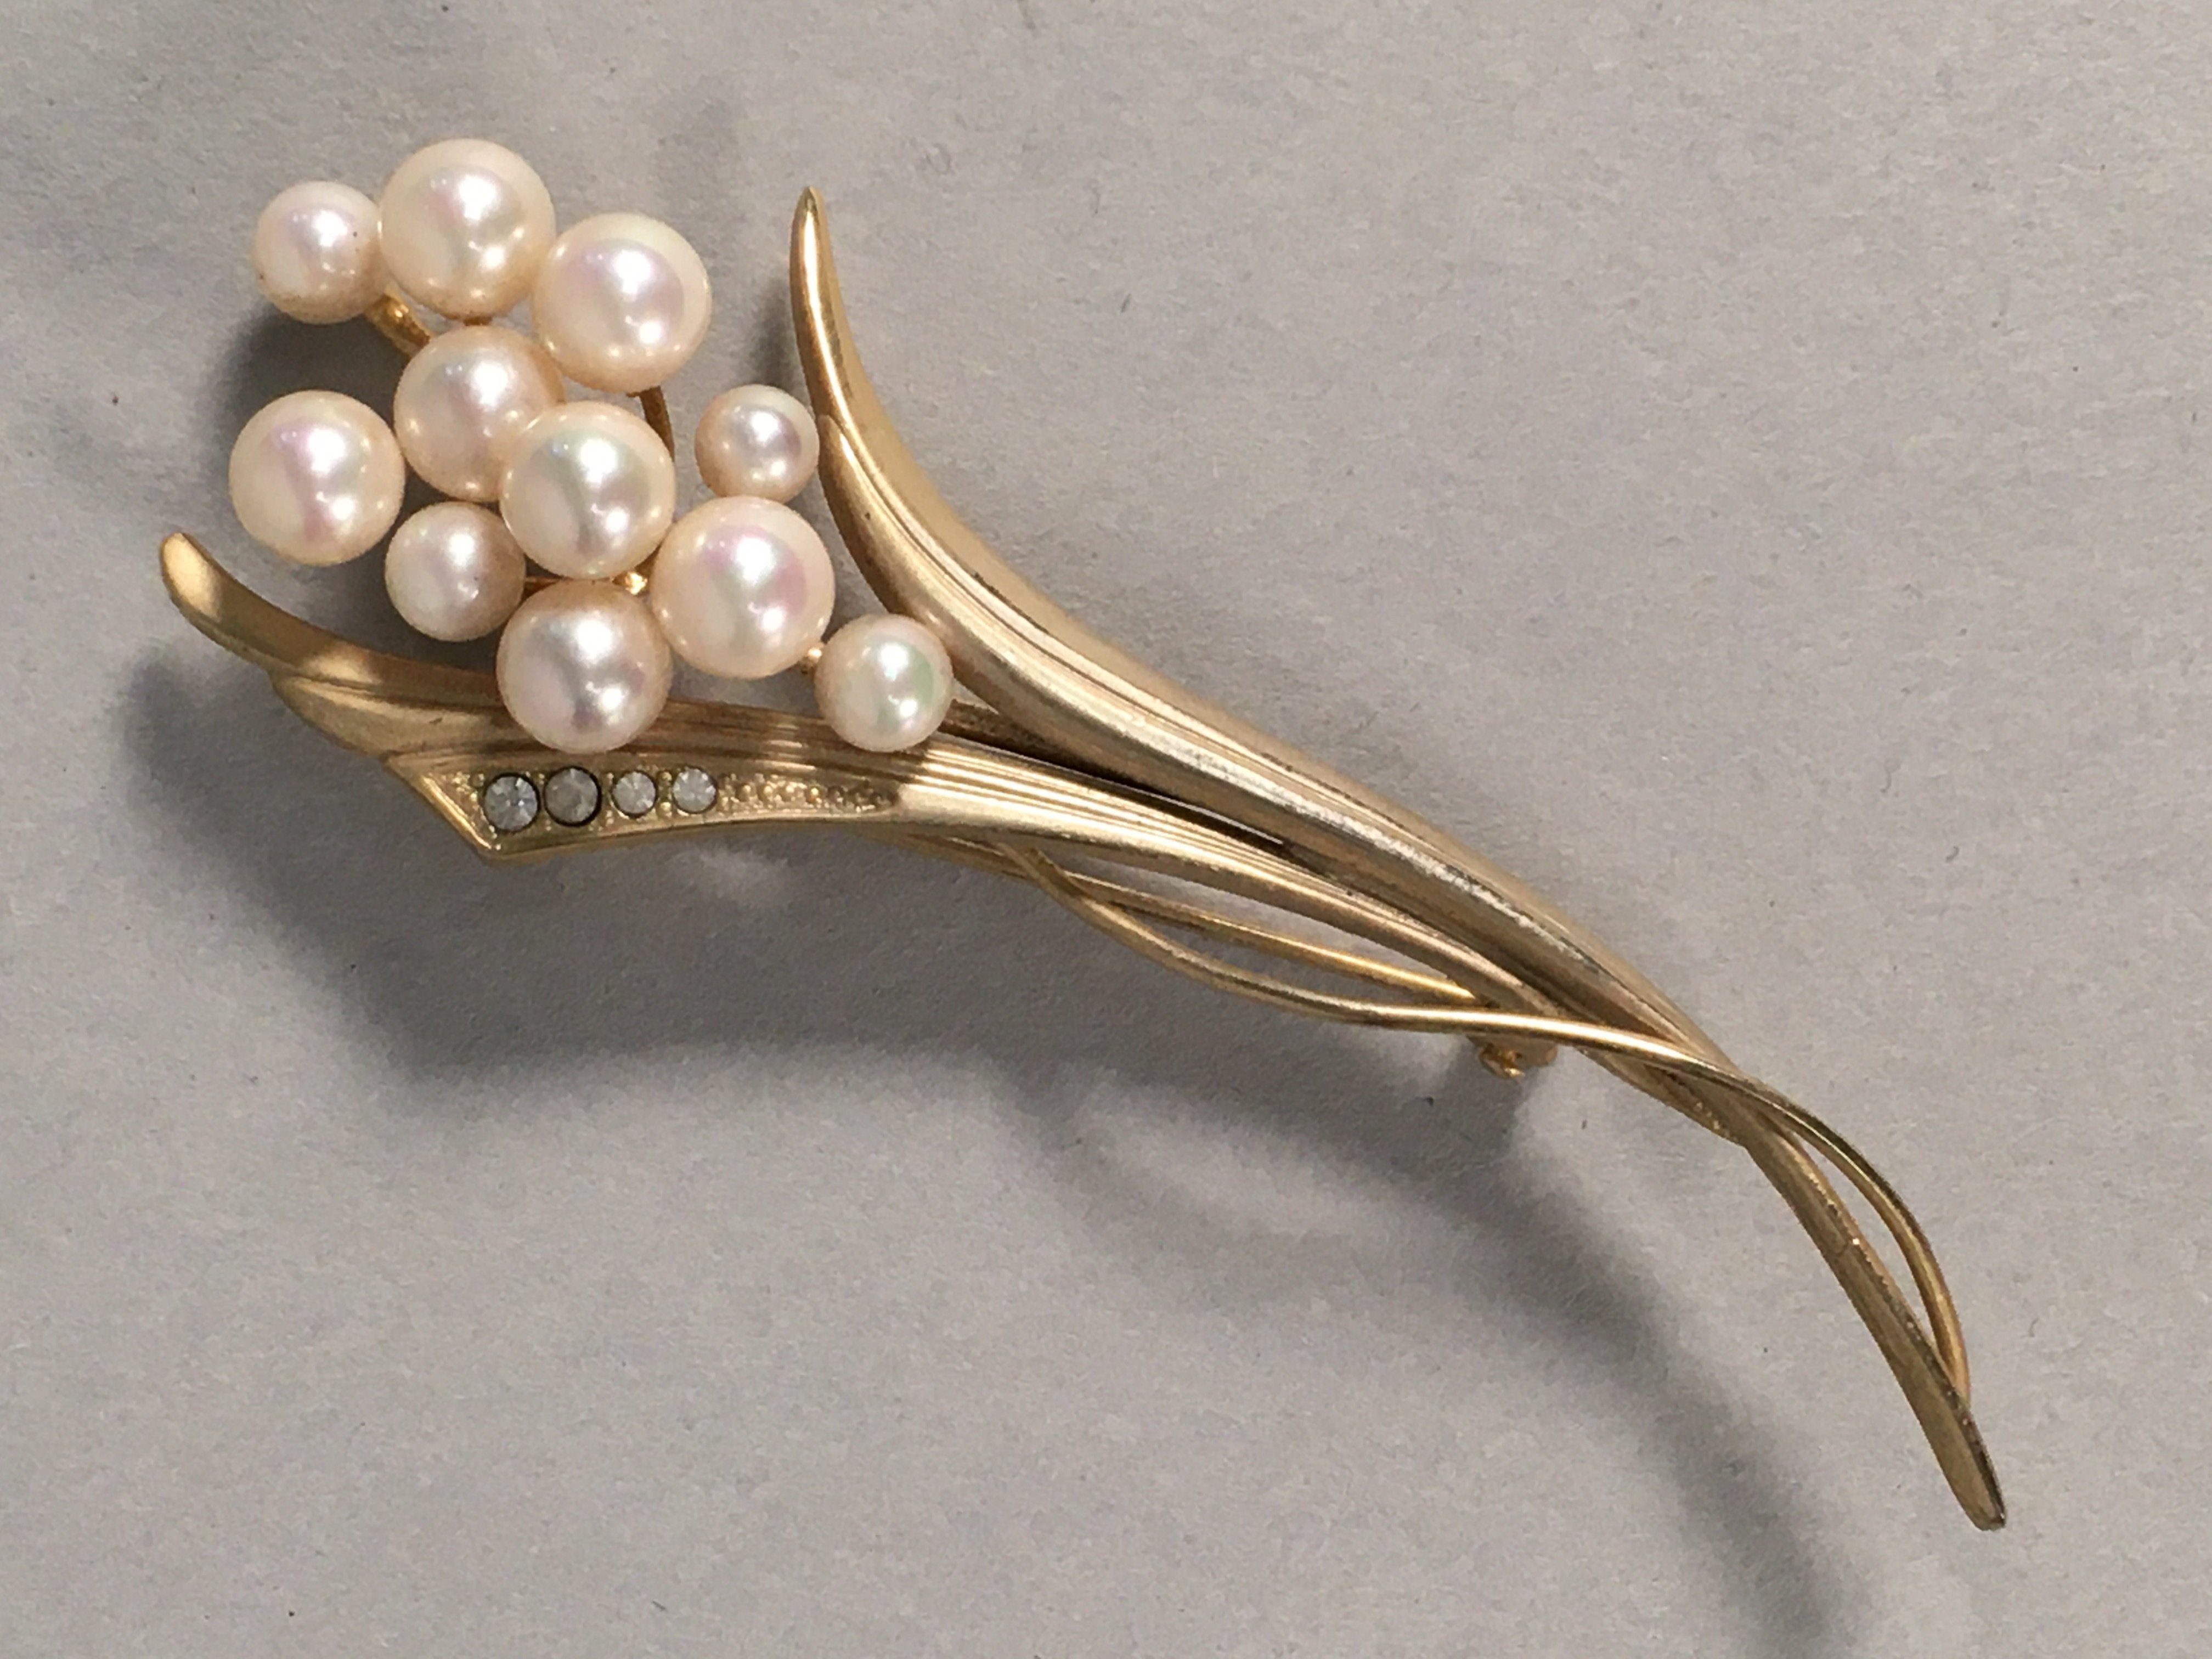 Japanese Pearl Floral Brooch Gold Metal Vtg Pin Artificial White Round JK46